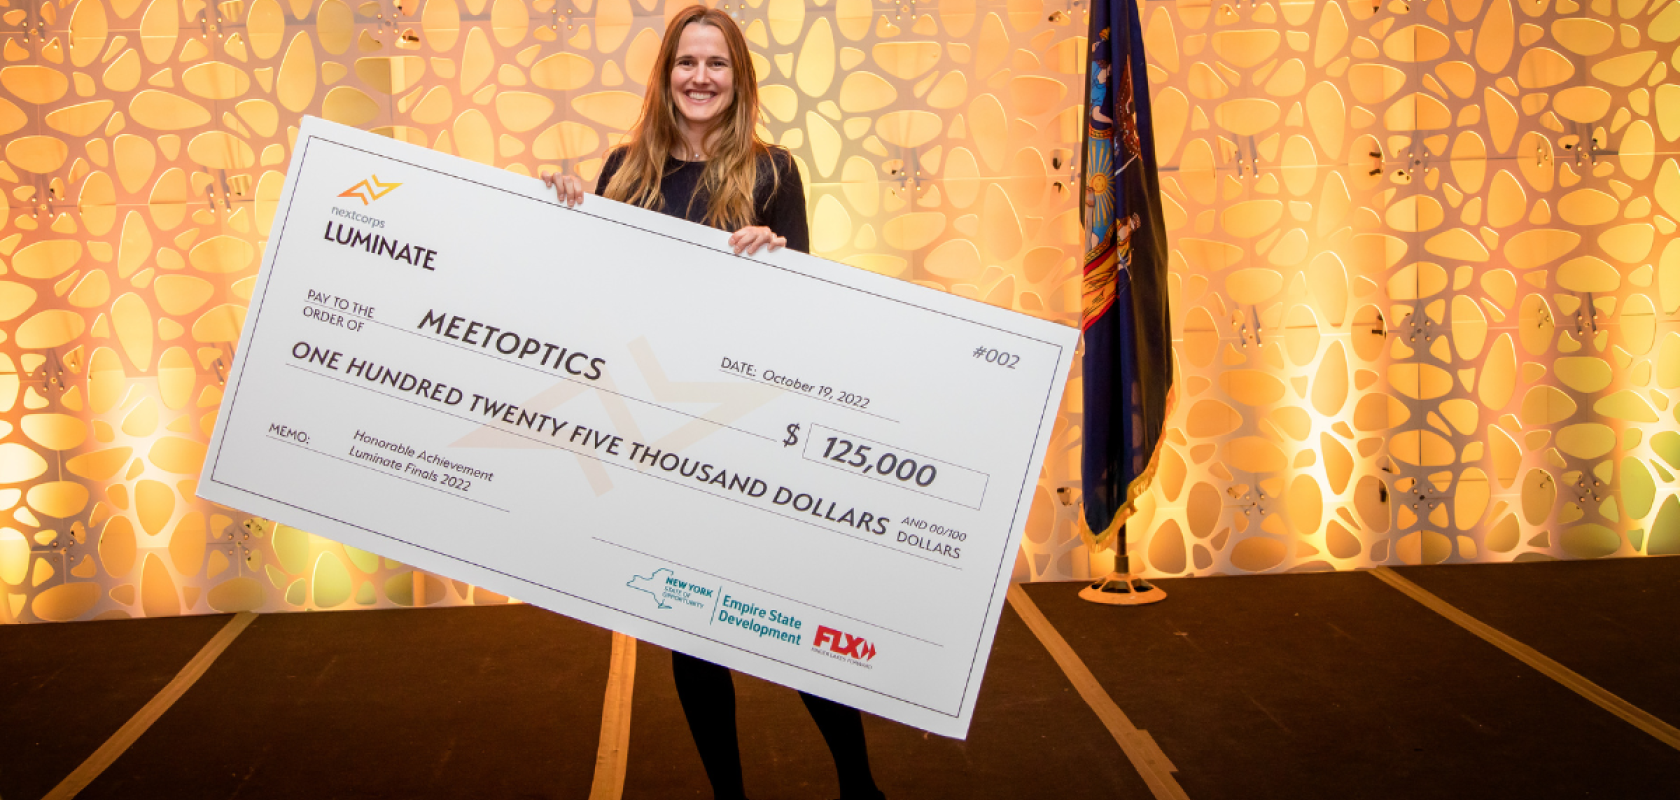 MEETOPTICS received $125,000 in follow-on funding at Luminate Finals 2022